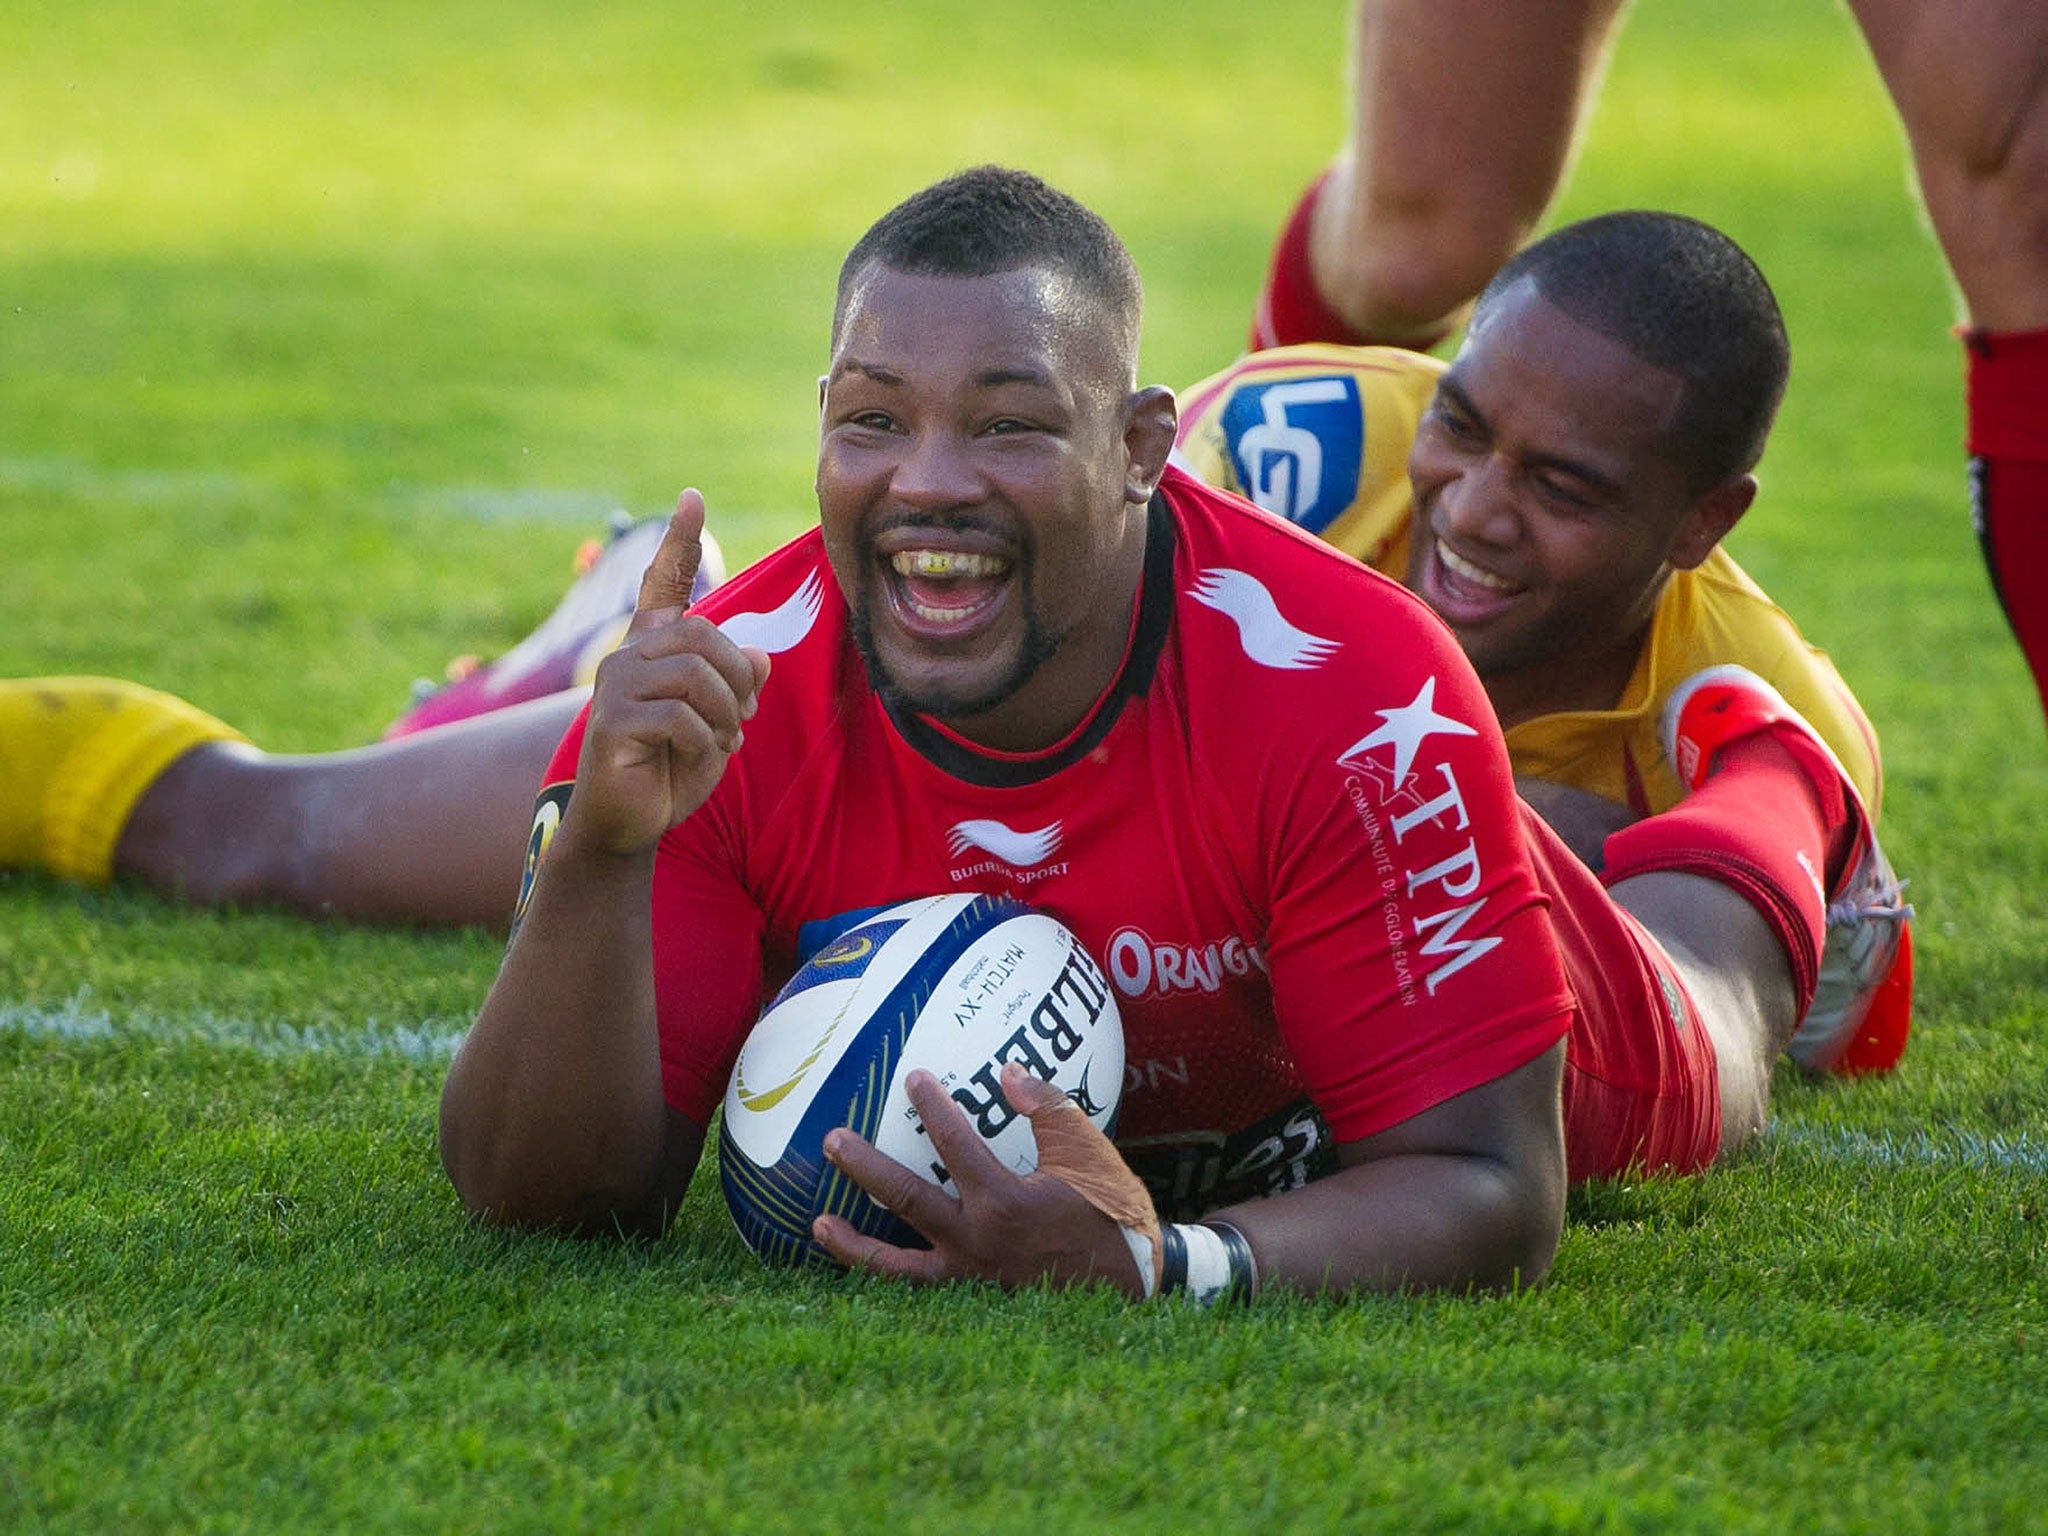 Toulon star Steffon Armitage can't play for England because of the selection policy